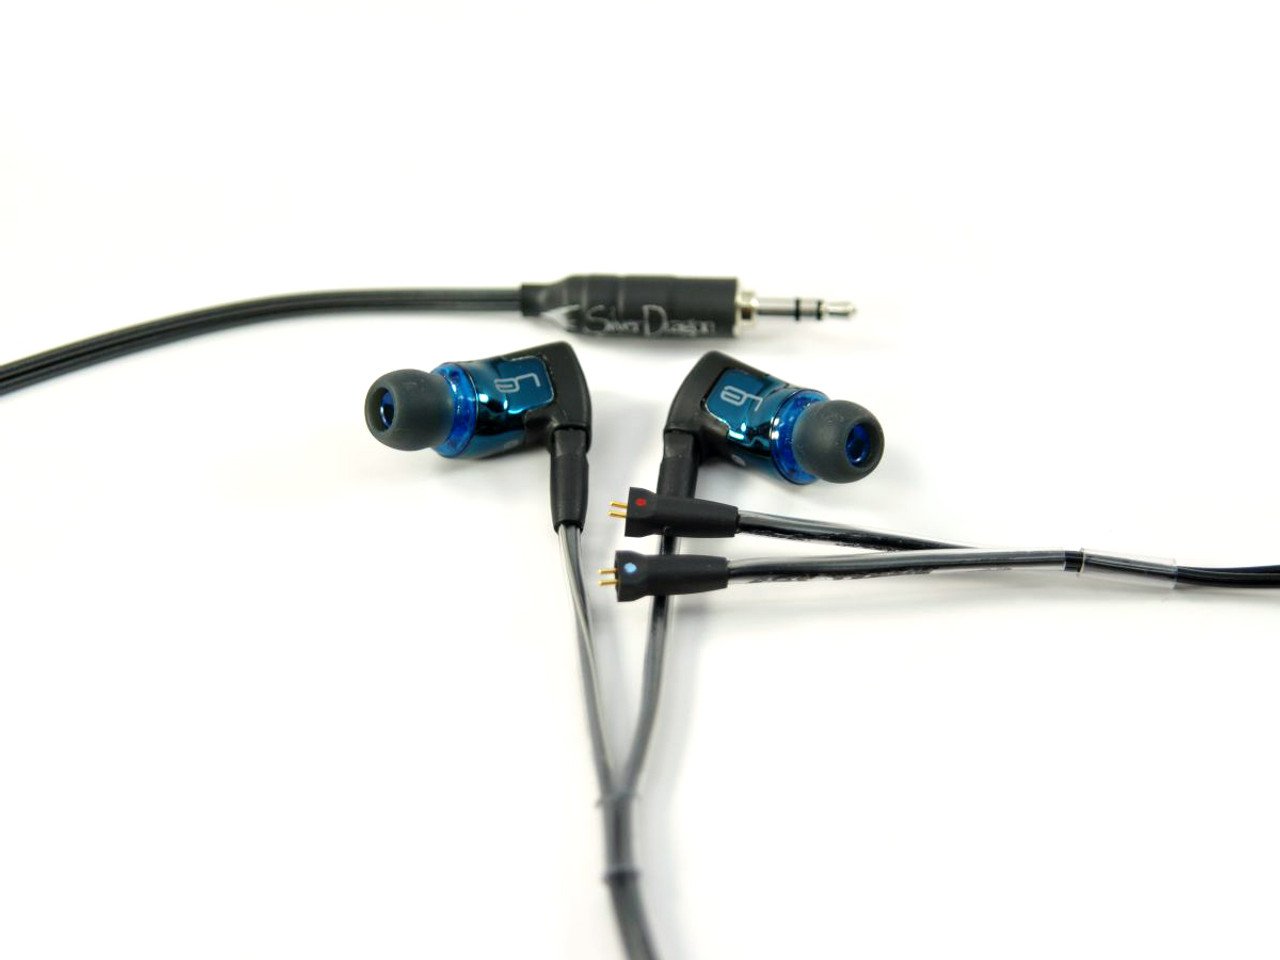 Silver Dragon Cable Ultimate Ears IEMs